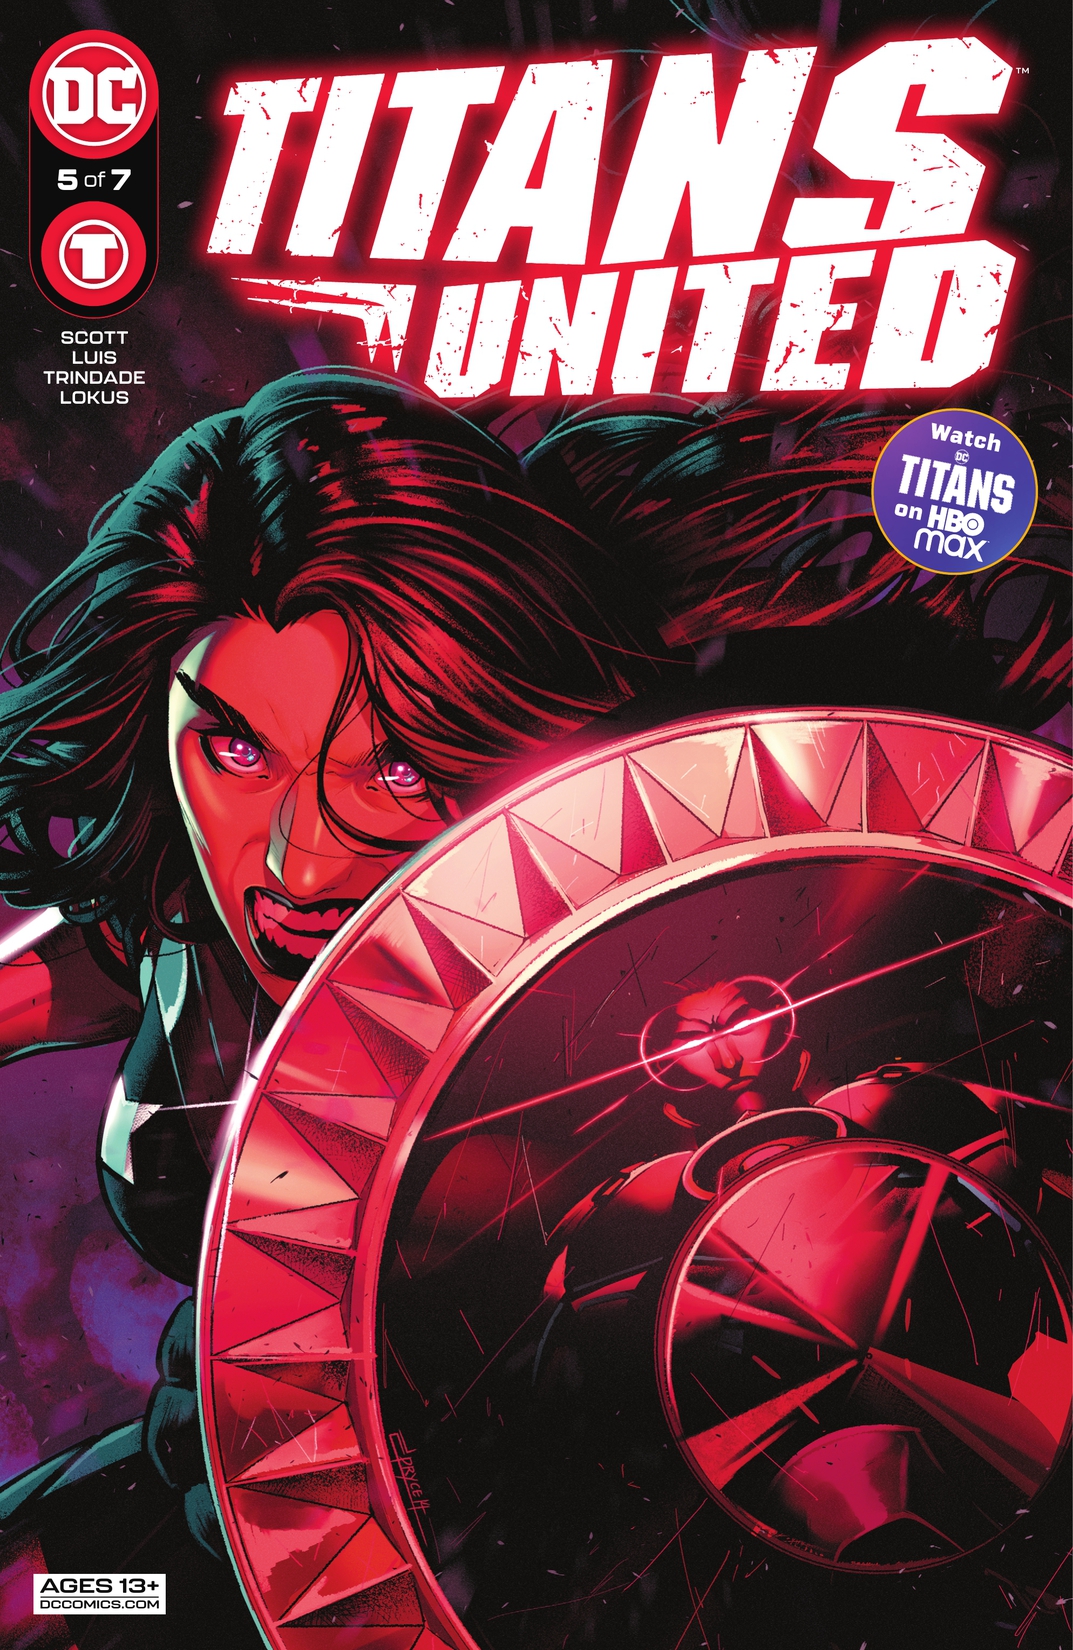 Titans United #5 preview images